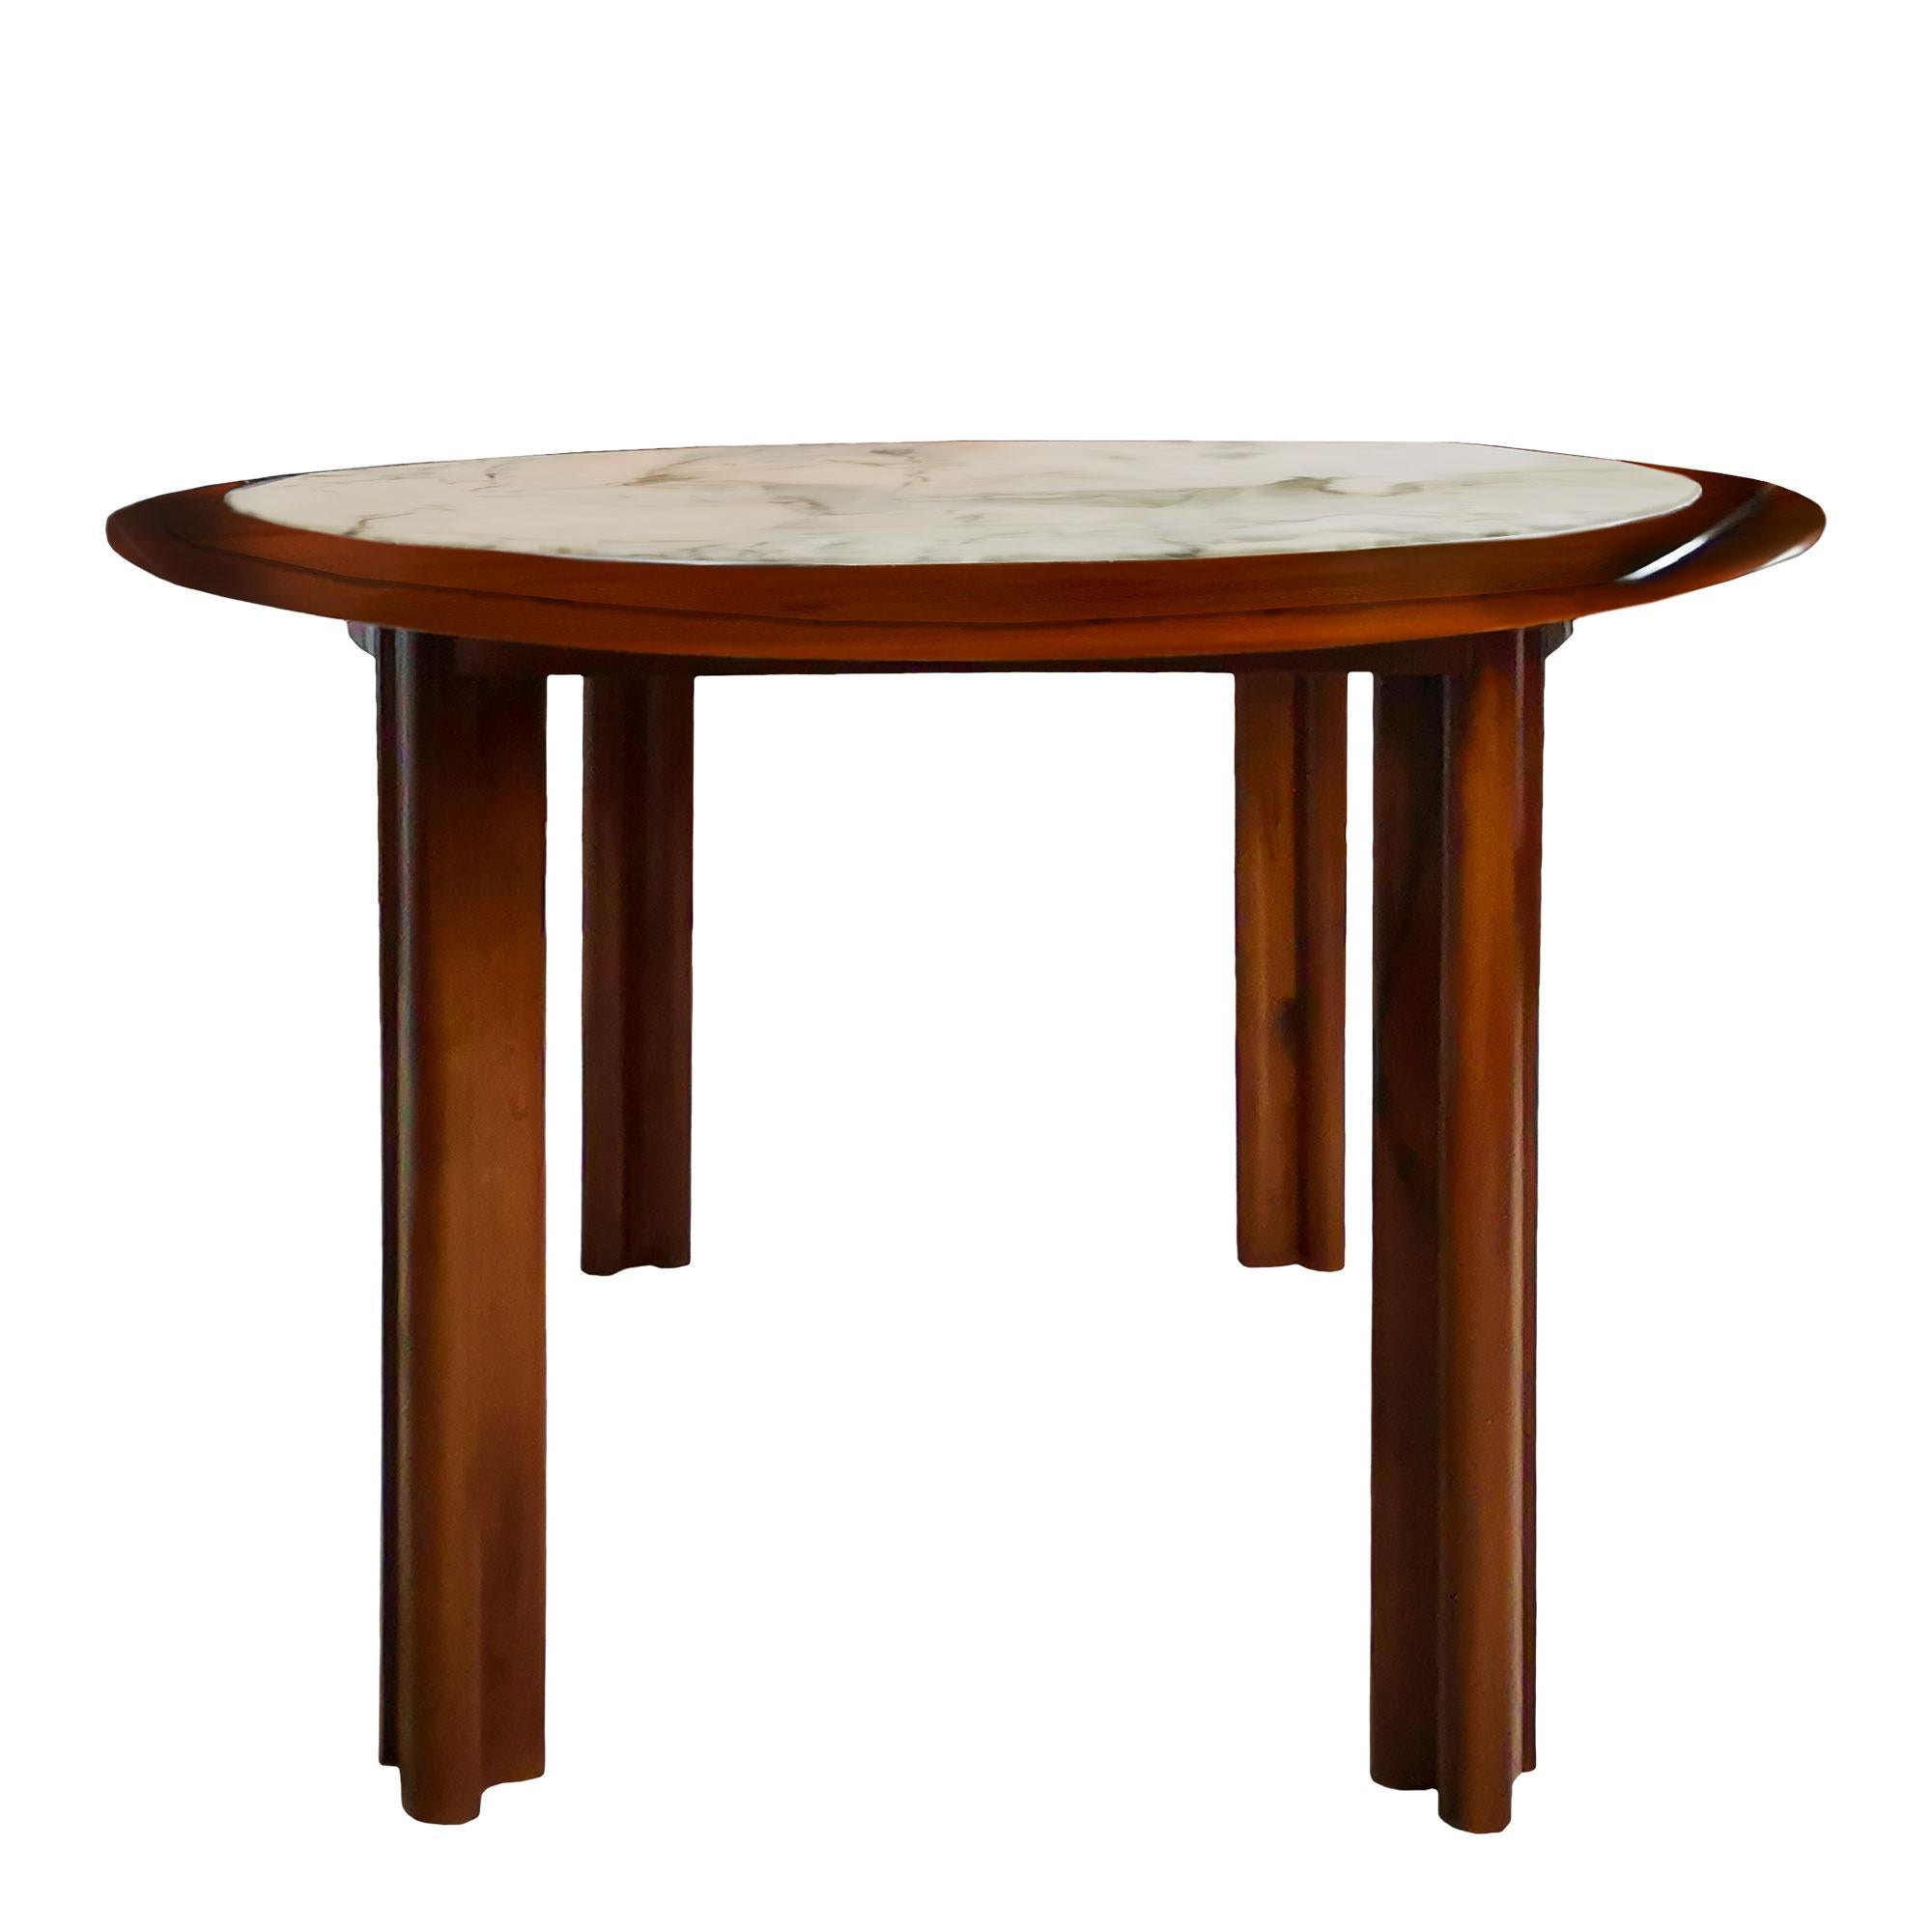 Italian Modern Oval Table in Solid Walnut with Marble Top - Italy, 1970 For Sale